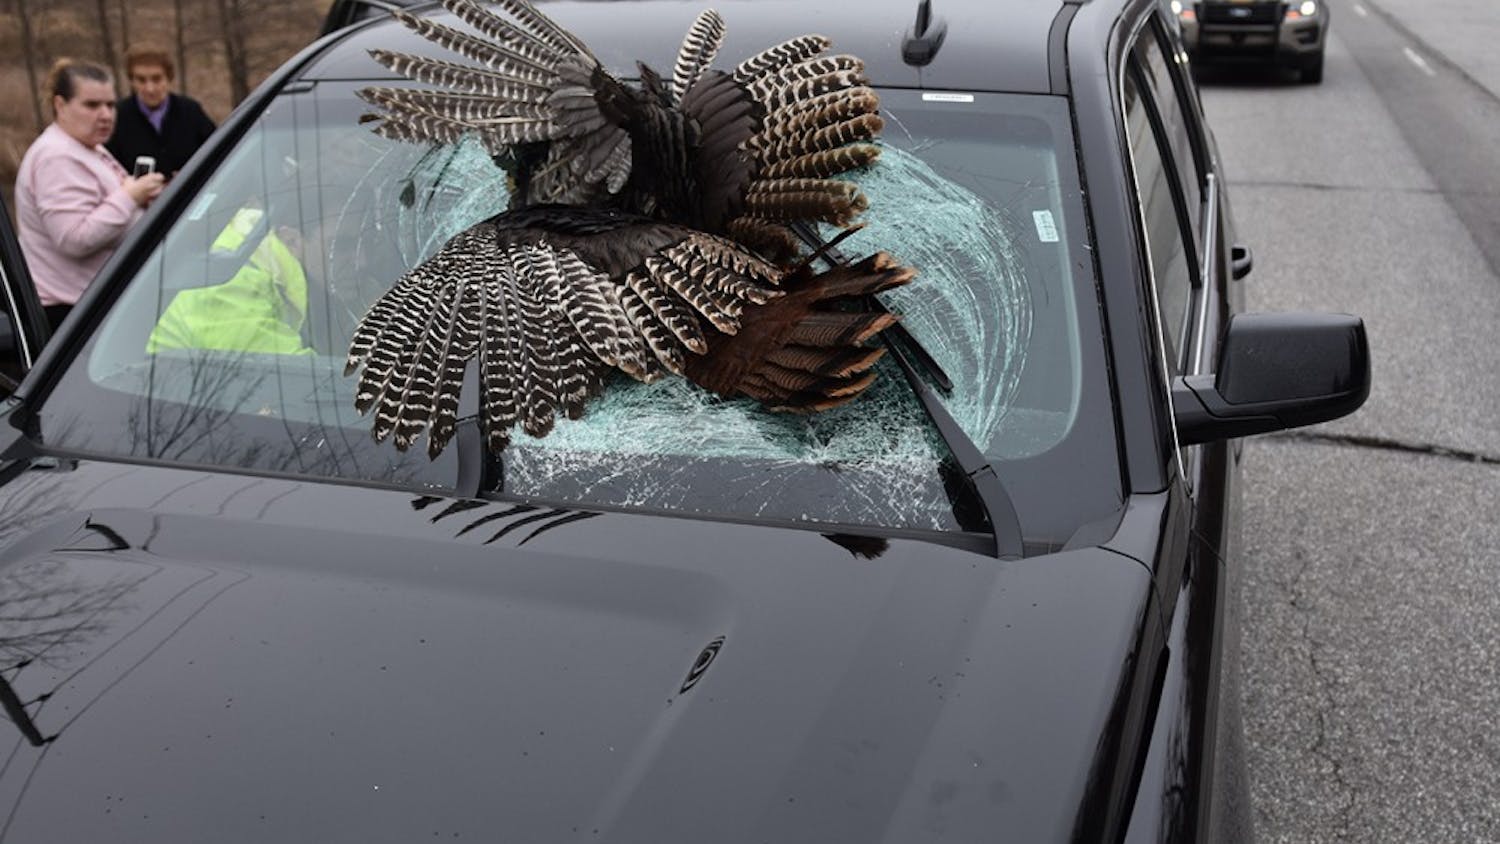 A 35-pound-turkey lodged in the windshield of John Tarabocchia's rental car. Tarabocchia was the first of three drivers to hit and kill a wild turkey in Indiana during the last week of March.